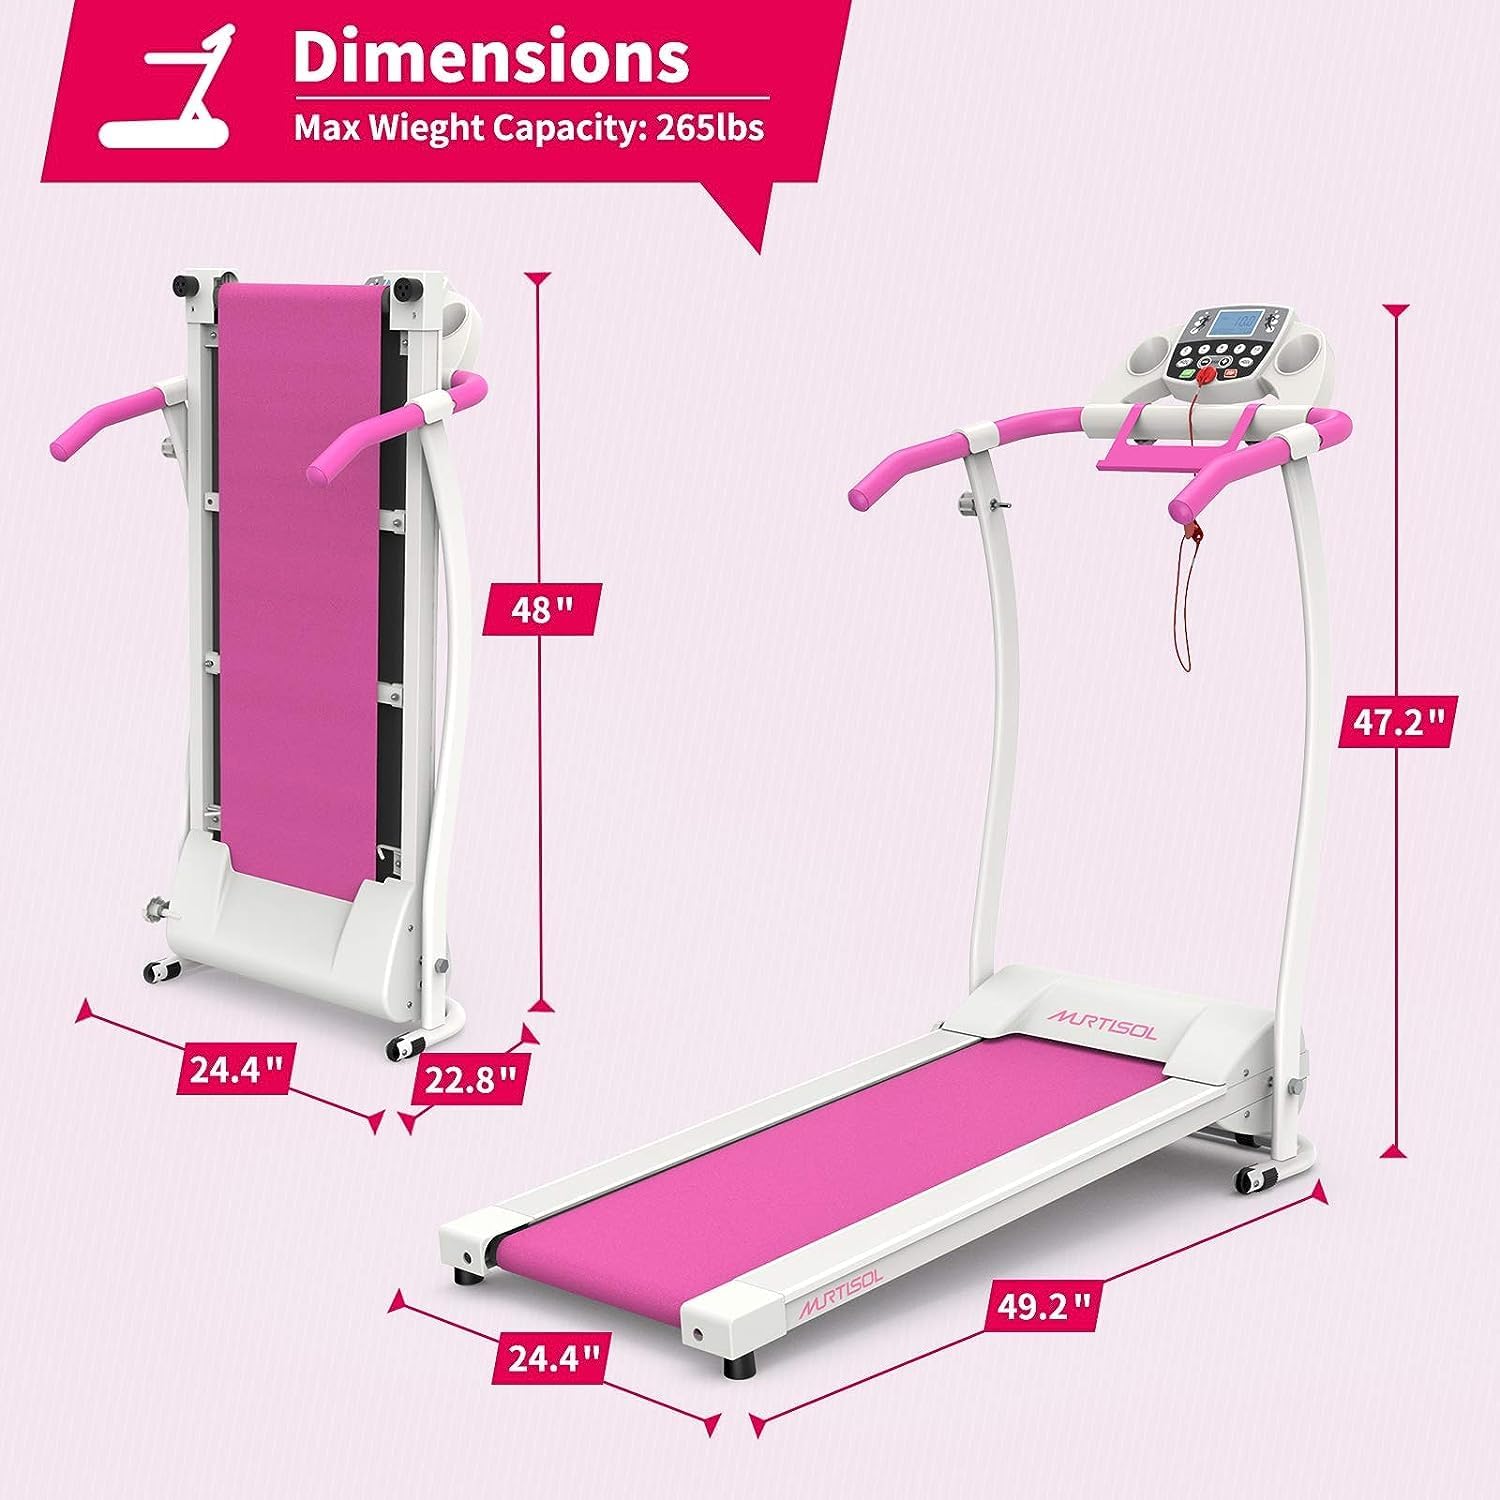 Folding Treadmill, 1.5HP Under Desk Electric Treadmill, Installation-Free with Bluetooth APP and LCD Display, Portable Walking Machine for Home, Office  Gym, Pink  White